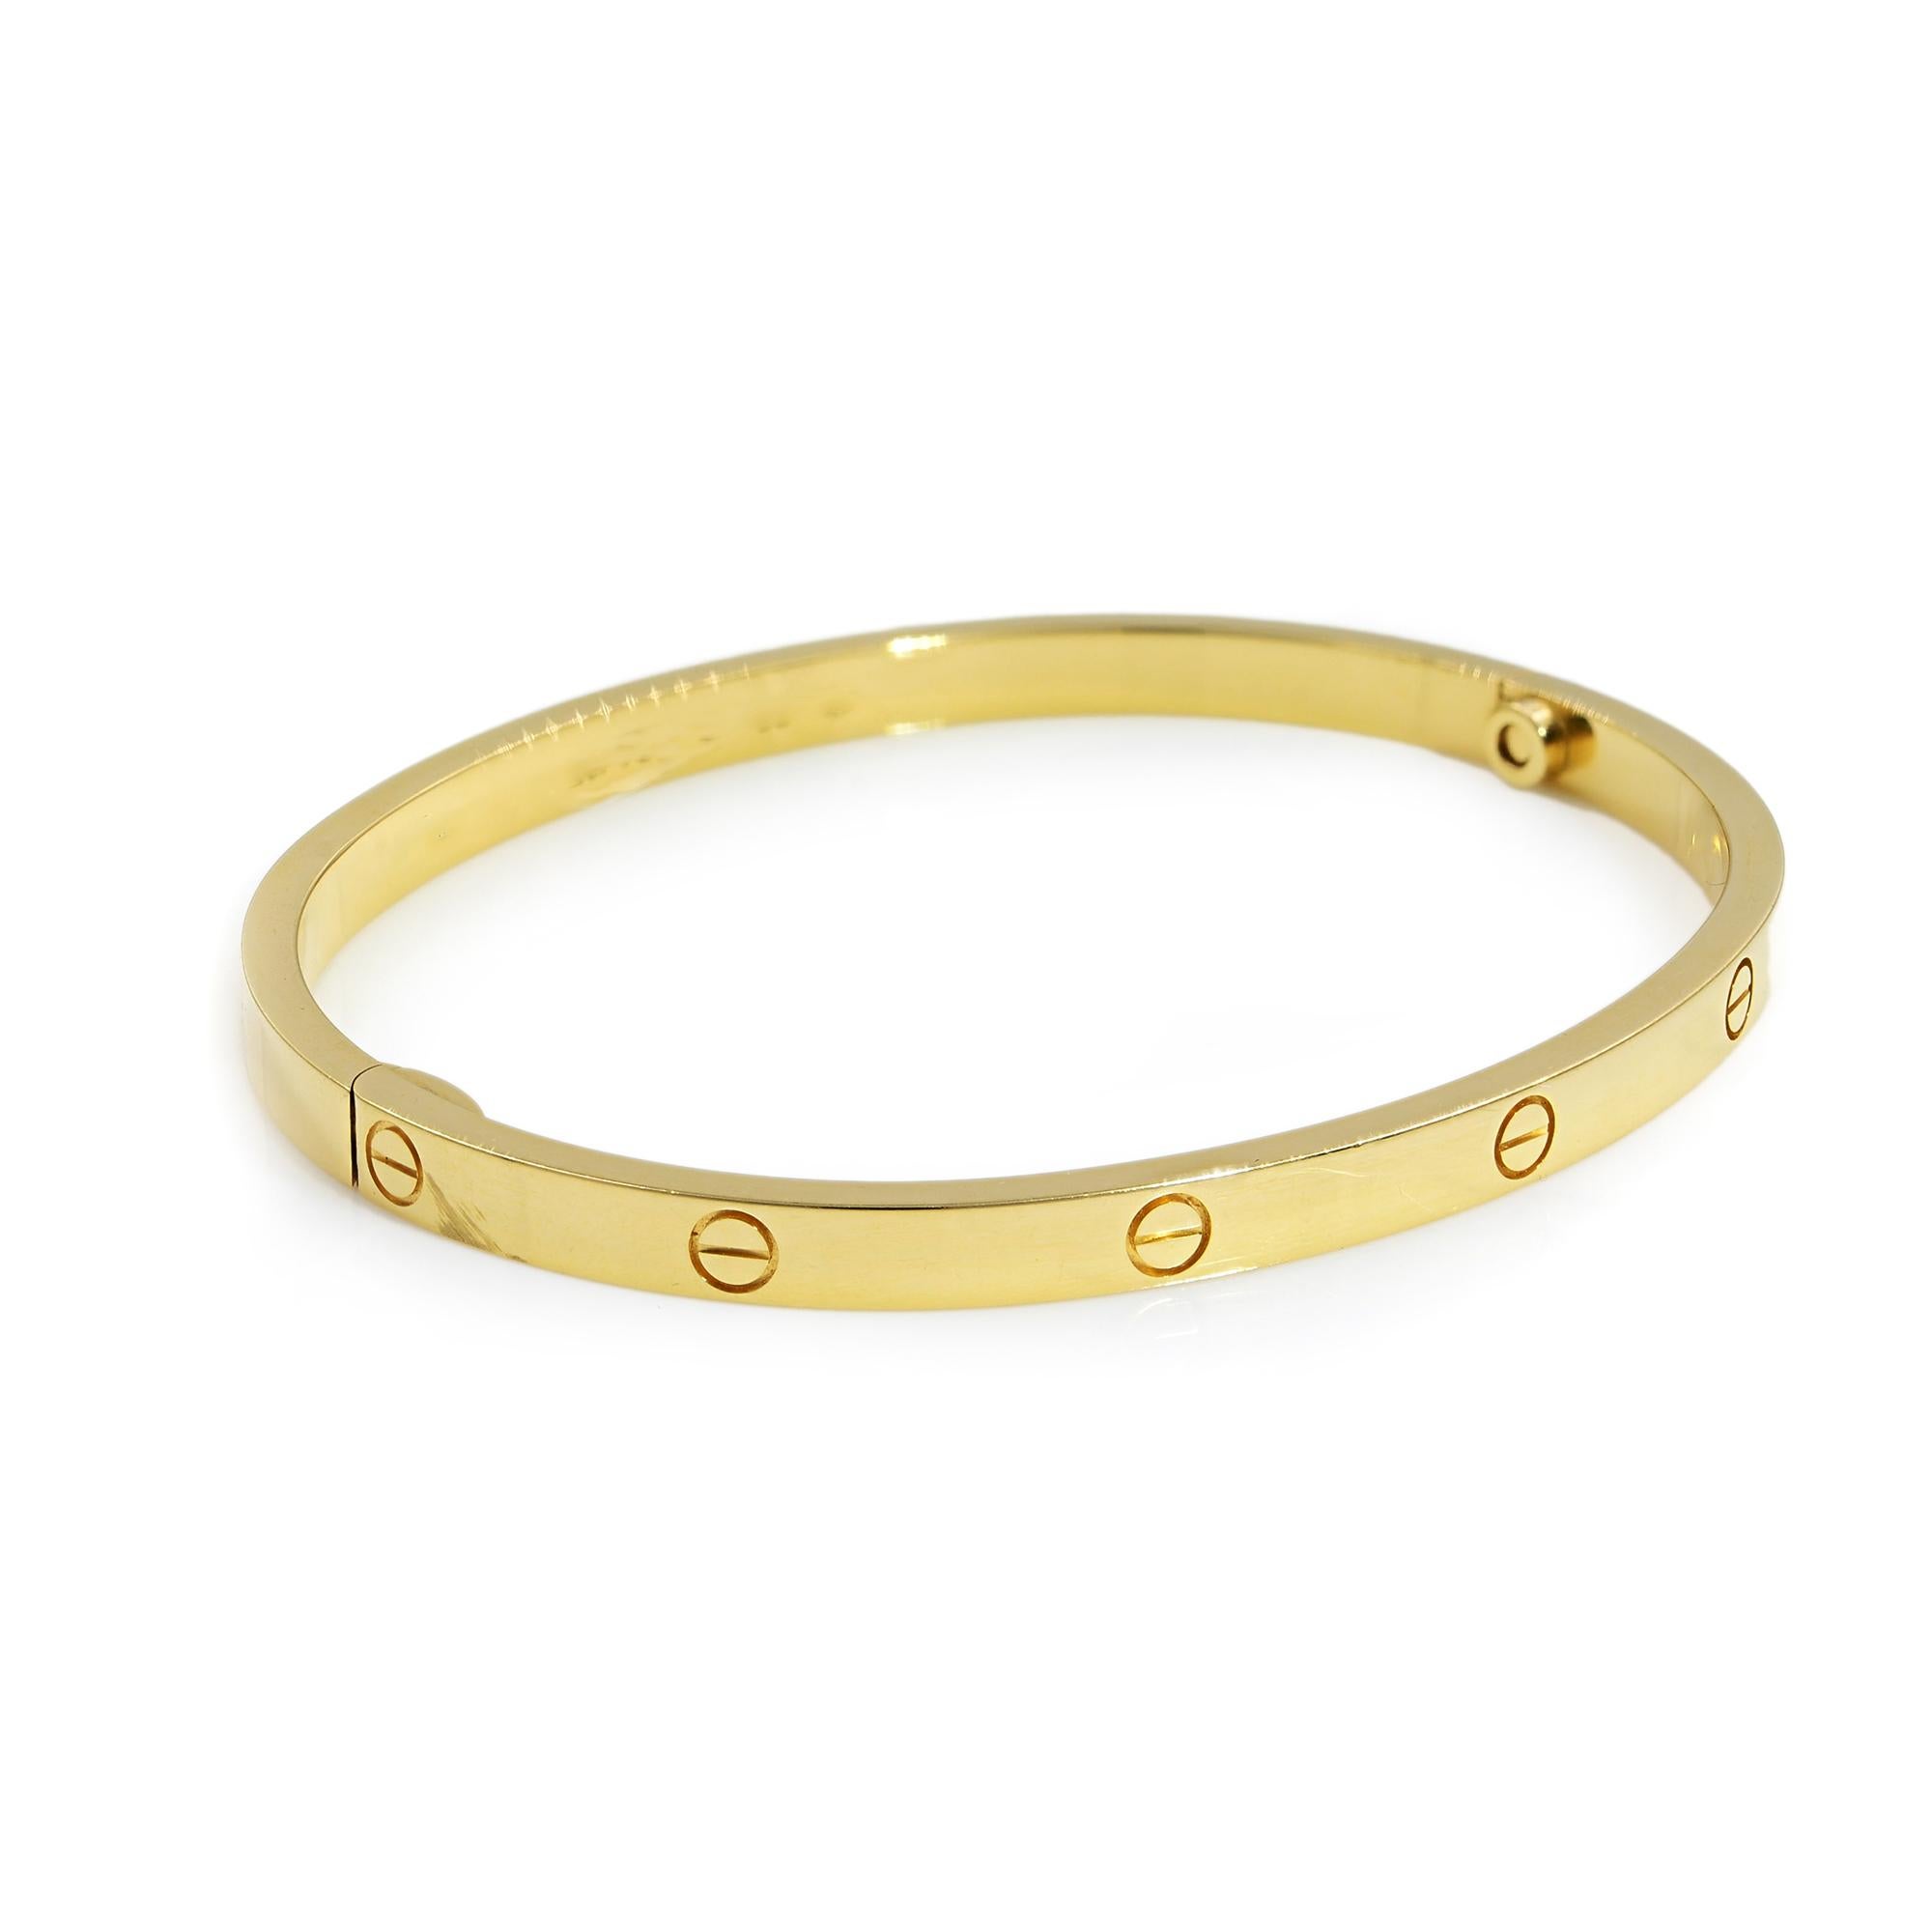 Cartier Yellow Gold Small Model Love Bracelet Size 16
Comes with box, papers and a screw driver

Metal Type: 18K Gold
Hallmark: 750, Serial Number 
Metal Finish: High Polish
Collection: Love
Condition: Very good. 